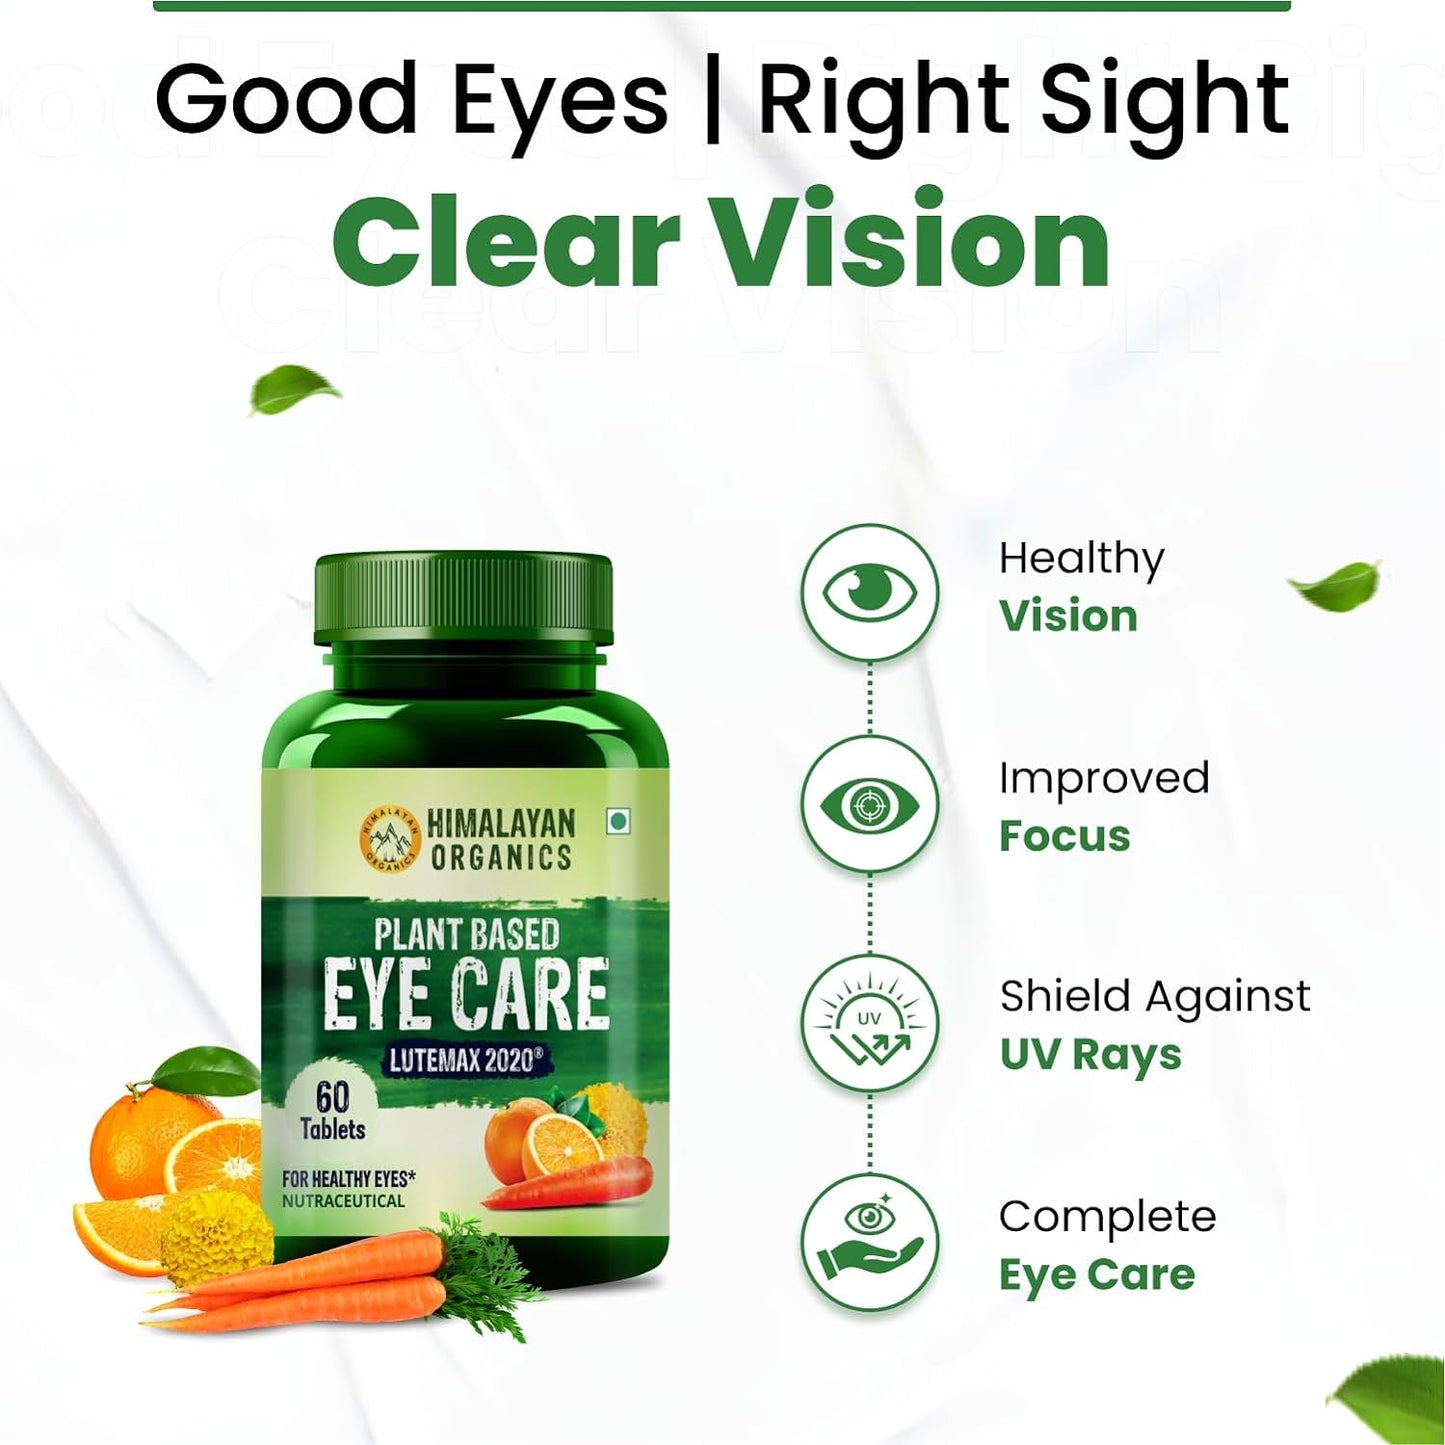 Himalayan Organics Plant Based Eye Care Supplement (Lutemax 2020, Orange Extract, Carrot Extract) - 60 Tablets